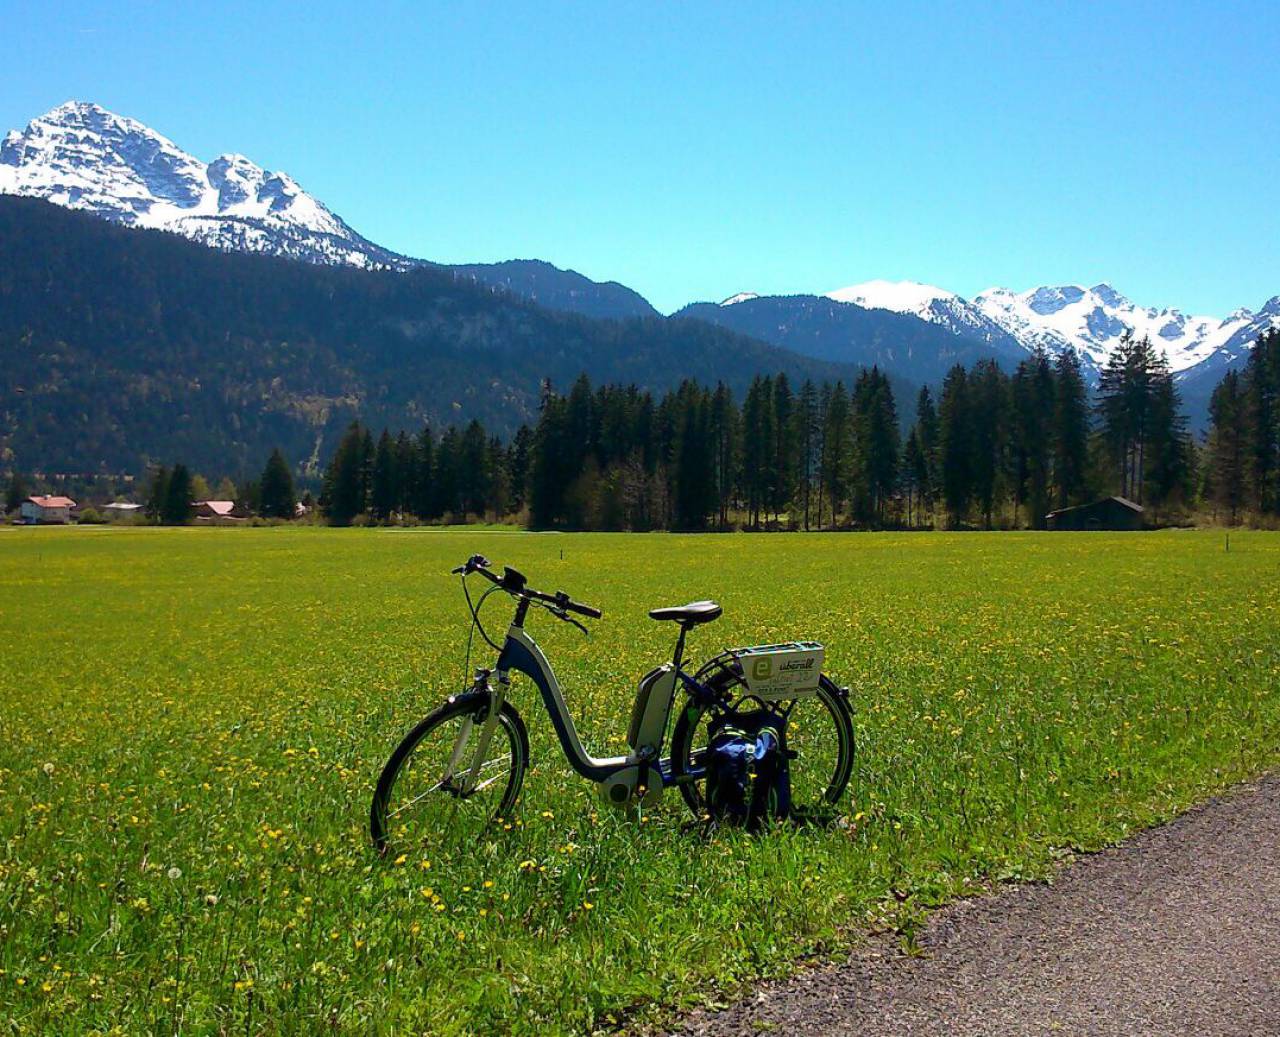 E-bike on a meadow in nature with mountain panorama